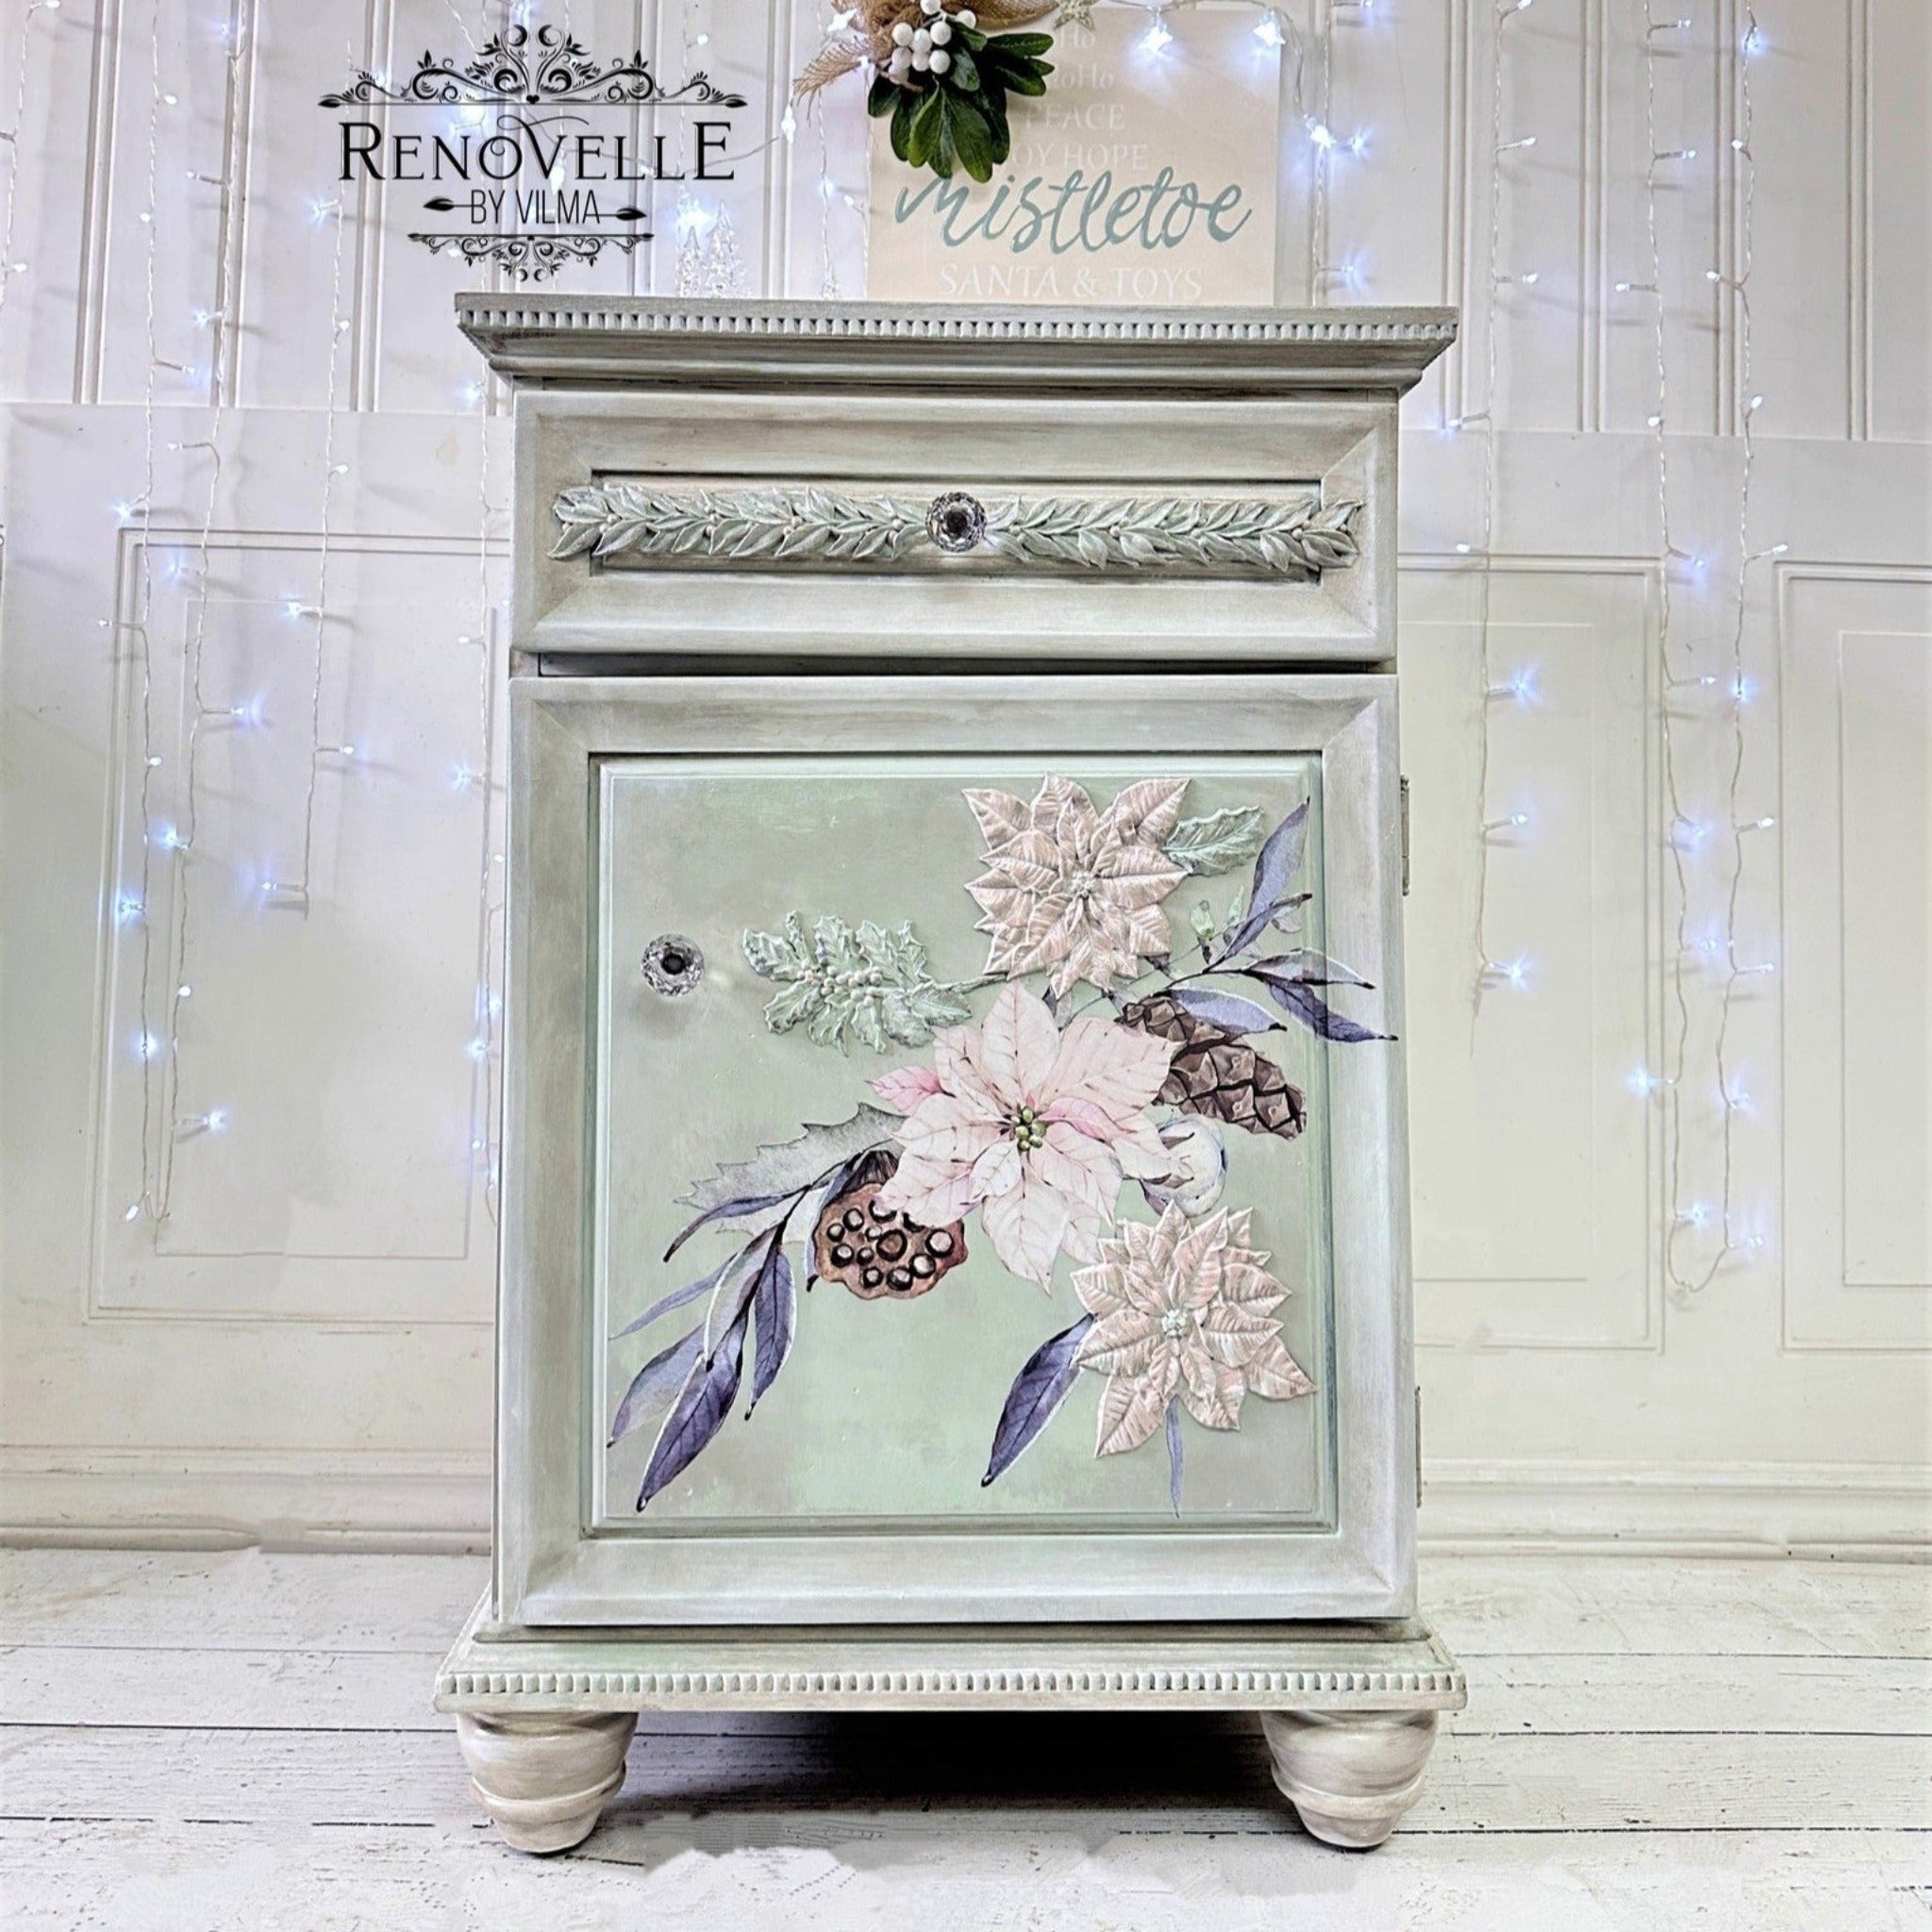 A vintage end table with storage refurbished by Renovelle by Vilma is painted pale green and features 2 ReDesign with Prima's Perfect Poinsettia silicone mold castings colored pale pink on the door.